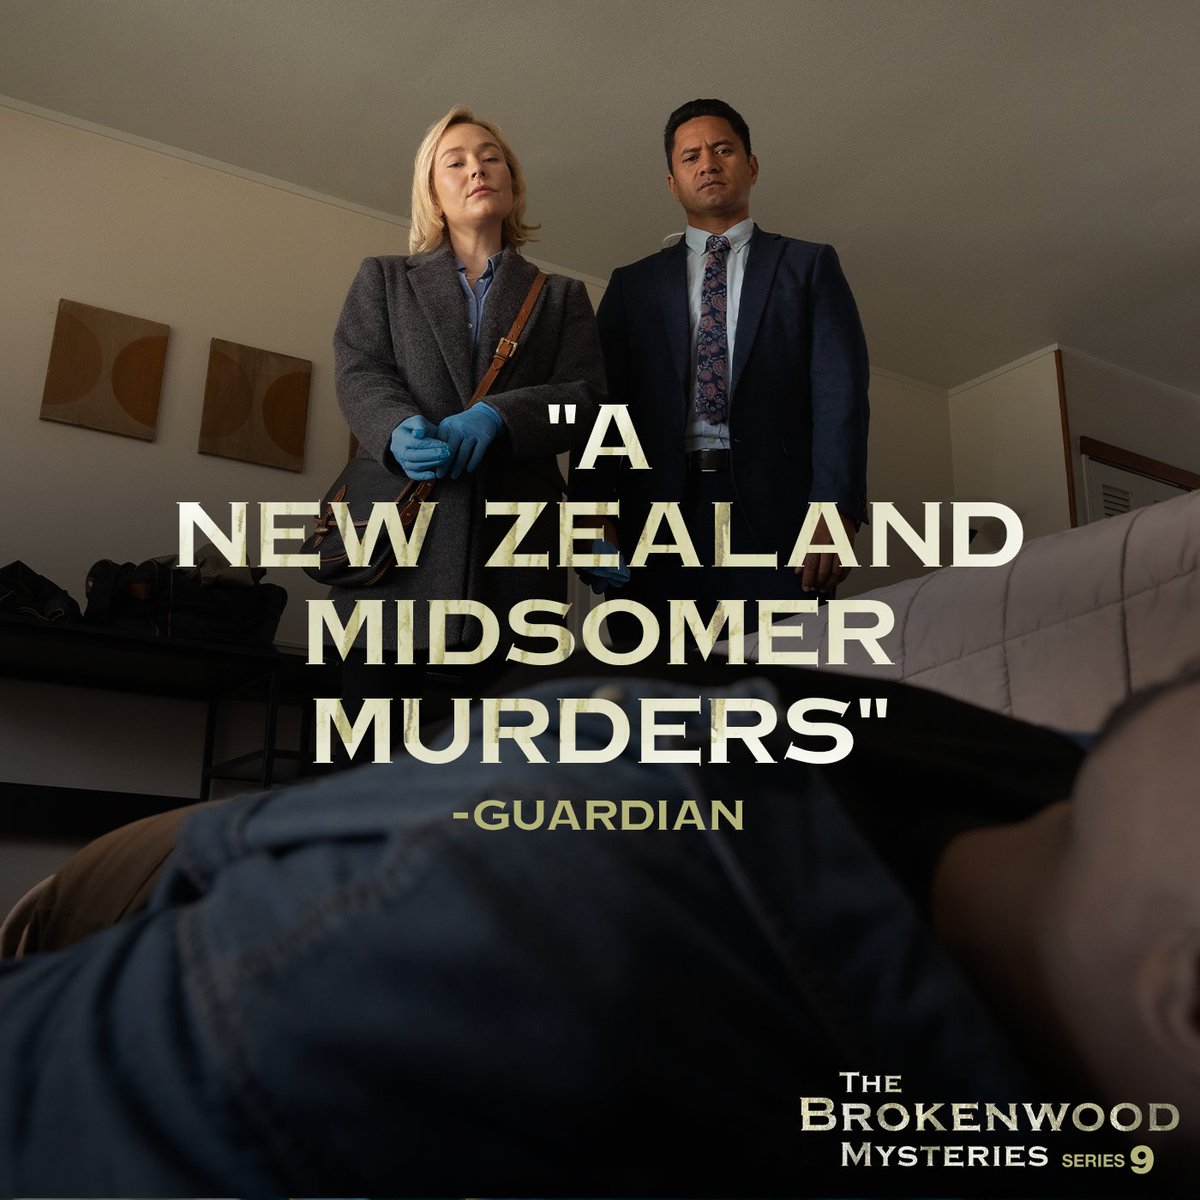 Detective Inspector Mike Shepherd is on the case. S9 of #BrokenwoodMysteries comes to DVD & Blu-Ray tomorrow: bit.ly/BrokenwoodS9